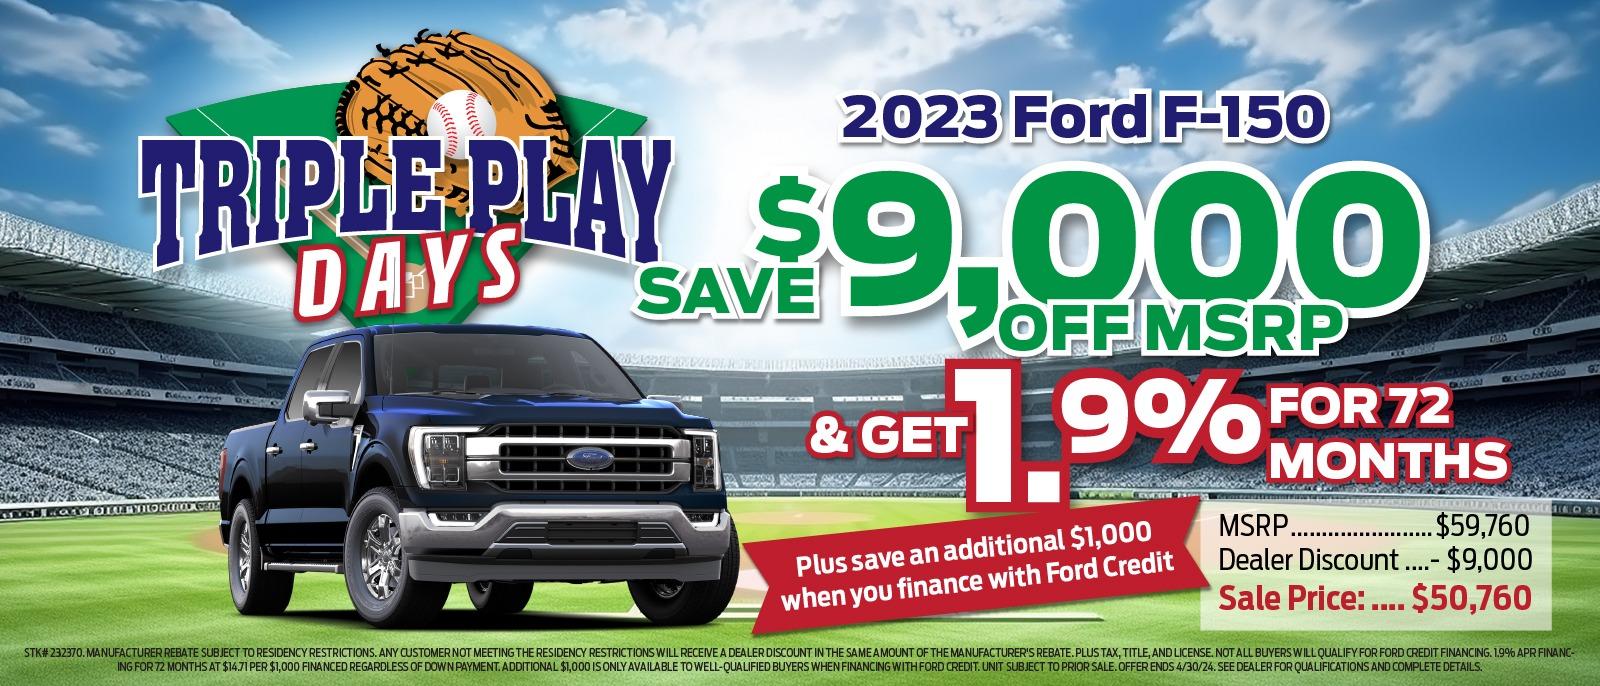 2023 Ford F-150 TRIPLE PLAY $ DAYS SAV $9,000 & GET OFF MSRP 9% FOR 72 Plus save an additional $1,000 when you finance with Ford Credit MONTHS MSRP. .$59,760 Dealer Discount ....- $9,000 Sale Price : .... . $50,760 STK# 232370. MANUFACTURER REBATE SUBJECT TO RESIDENCY RESTRICTIONS. ANY CUSTOMER NOT MEETING THE RESIDENCY RESTRICTIONS WILL RECEIVE A DEALER DISCOUNT IN THE SAME AMOUNT OF THE MANUFACTURER'S REBATE. PLUS TAX, TITLE, AND LICENSE. NOT ALL BUYERS WILL QUALIFY FOR FORD CREDIT FINANCING. 19% APR FINANC- ING FOR 72 MONTHS AT $14.71 PER $1,000 FINANCED REGARDLESS OF DOWN PAYMENT. ADDITIONAL $1,000 IS ONLY AVAILABLE TO WELL-QUALIFIED BUYERS WHEN FINANCING WITH FORD CREDIT. UNIT SUBJECT TO PRIOR SALE. OFFER ENDS 4/30/24. SEE DEALER FOR QUALIFICATIONS AND COMPLETE DETAILS.